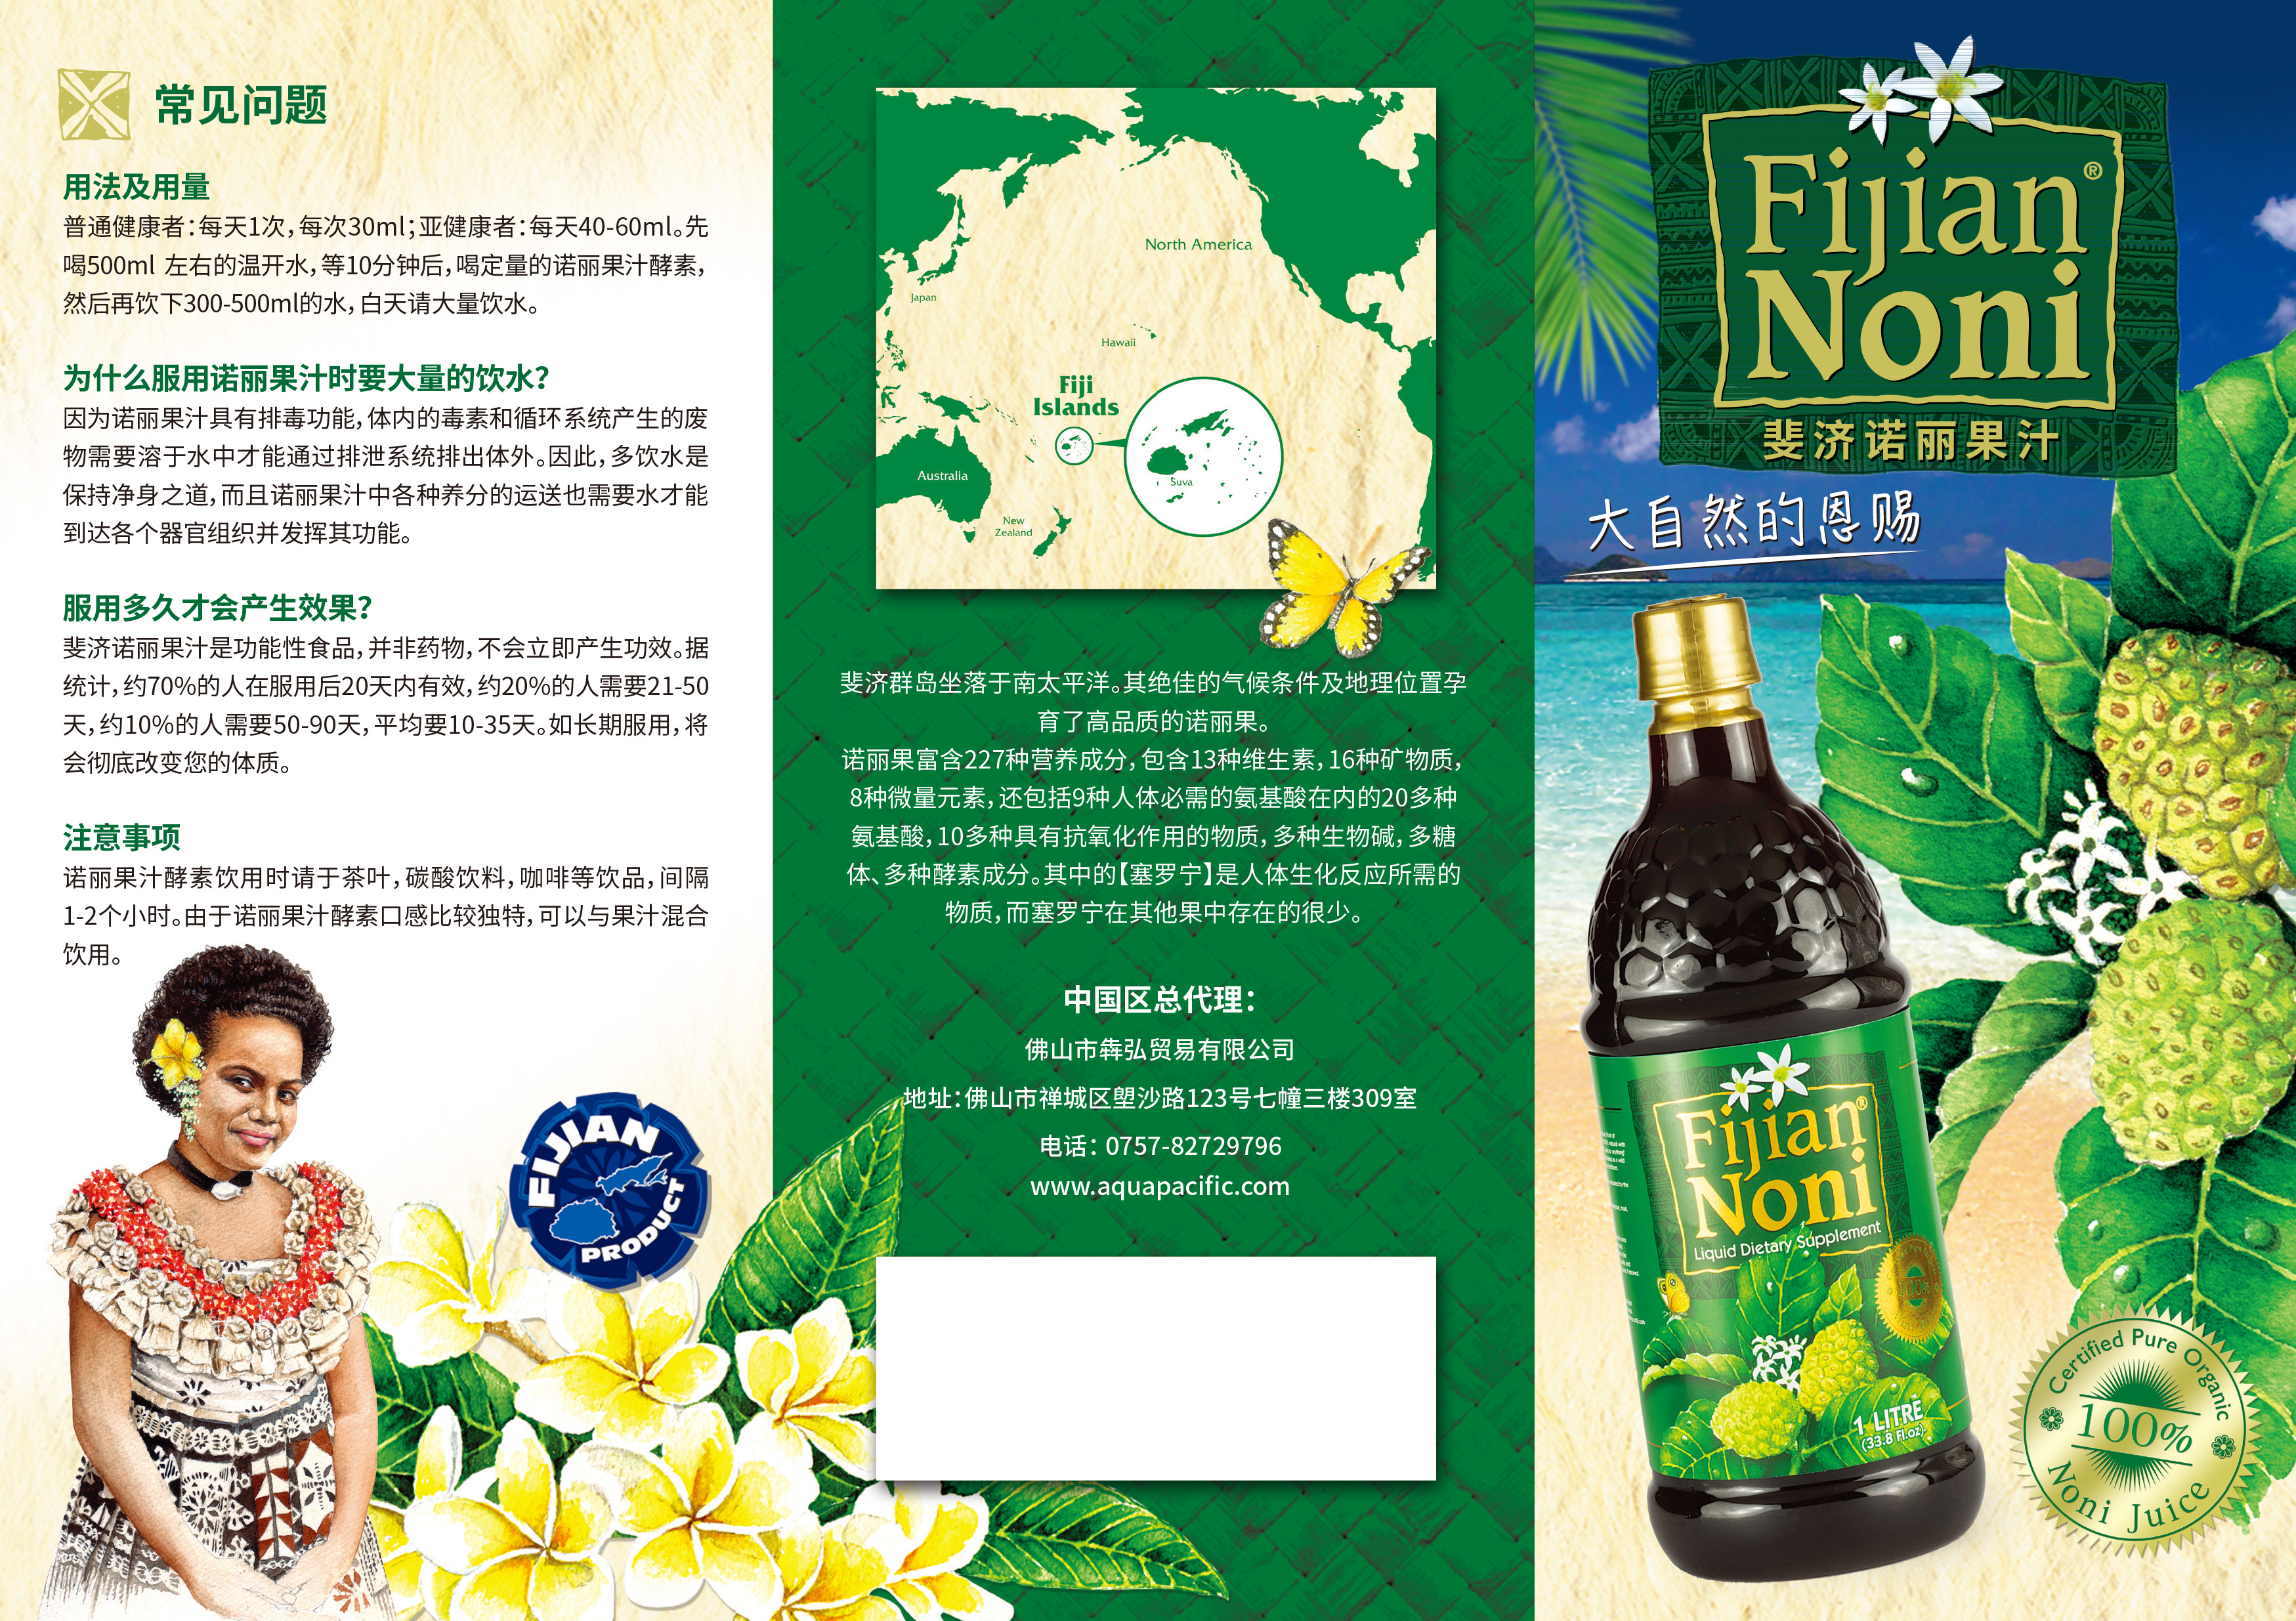 Imported Noni juice from Fiji